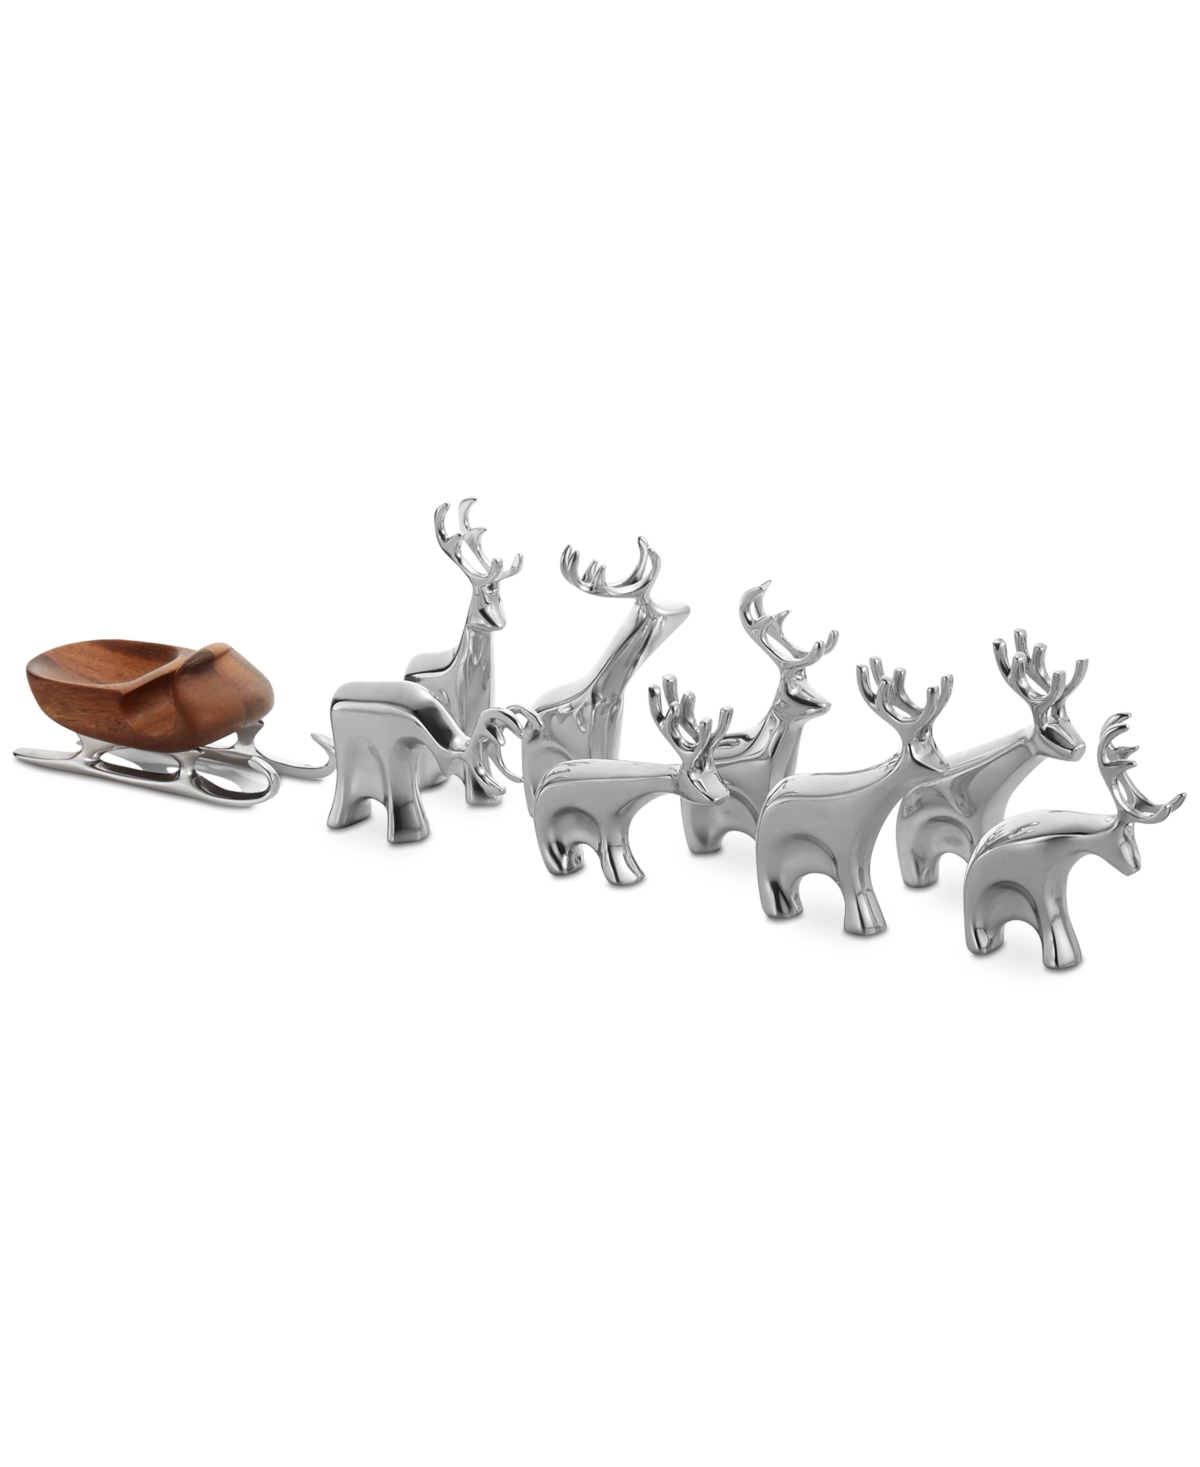 Mini Reindeer 9-Pc. Set - Silver And Gold